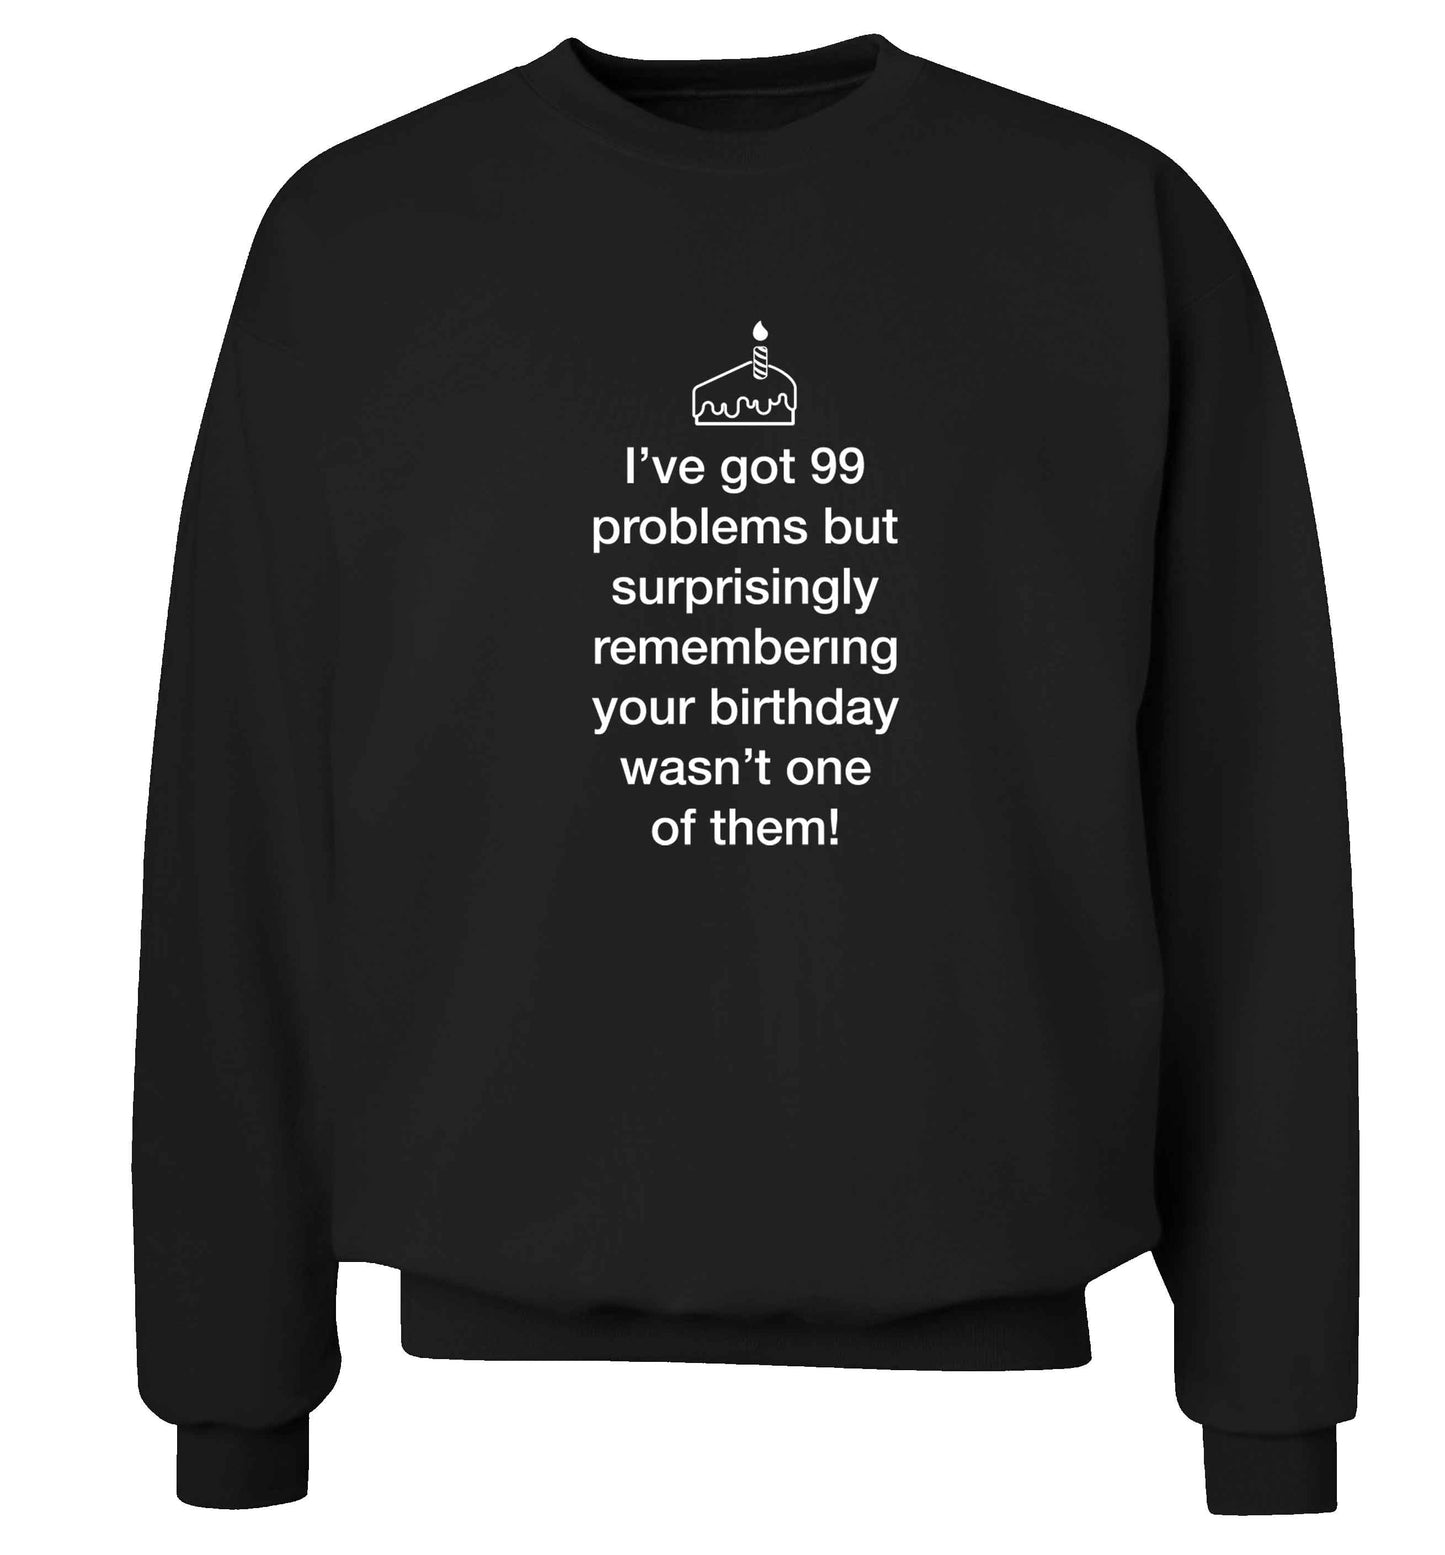 I've got 99 problems but surprisingly remembering your birthday wasn't one of them! adult's unisex black sweater 2XL